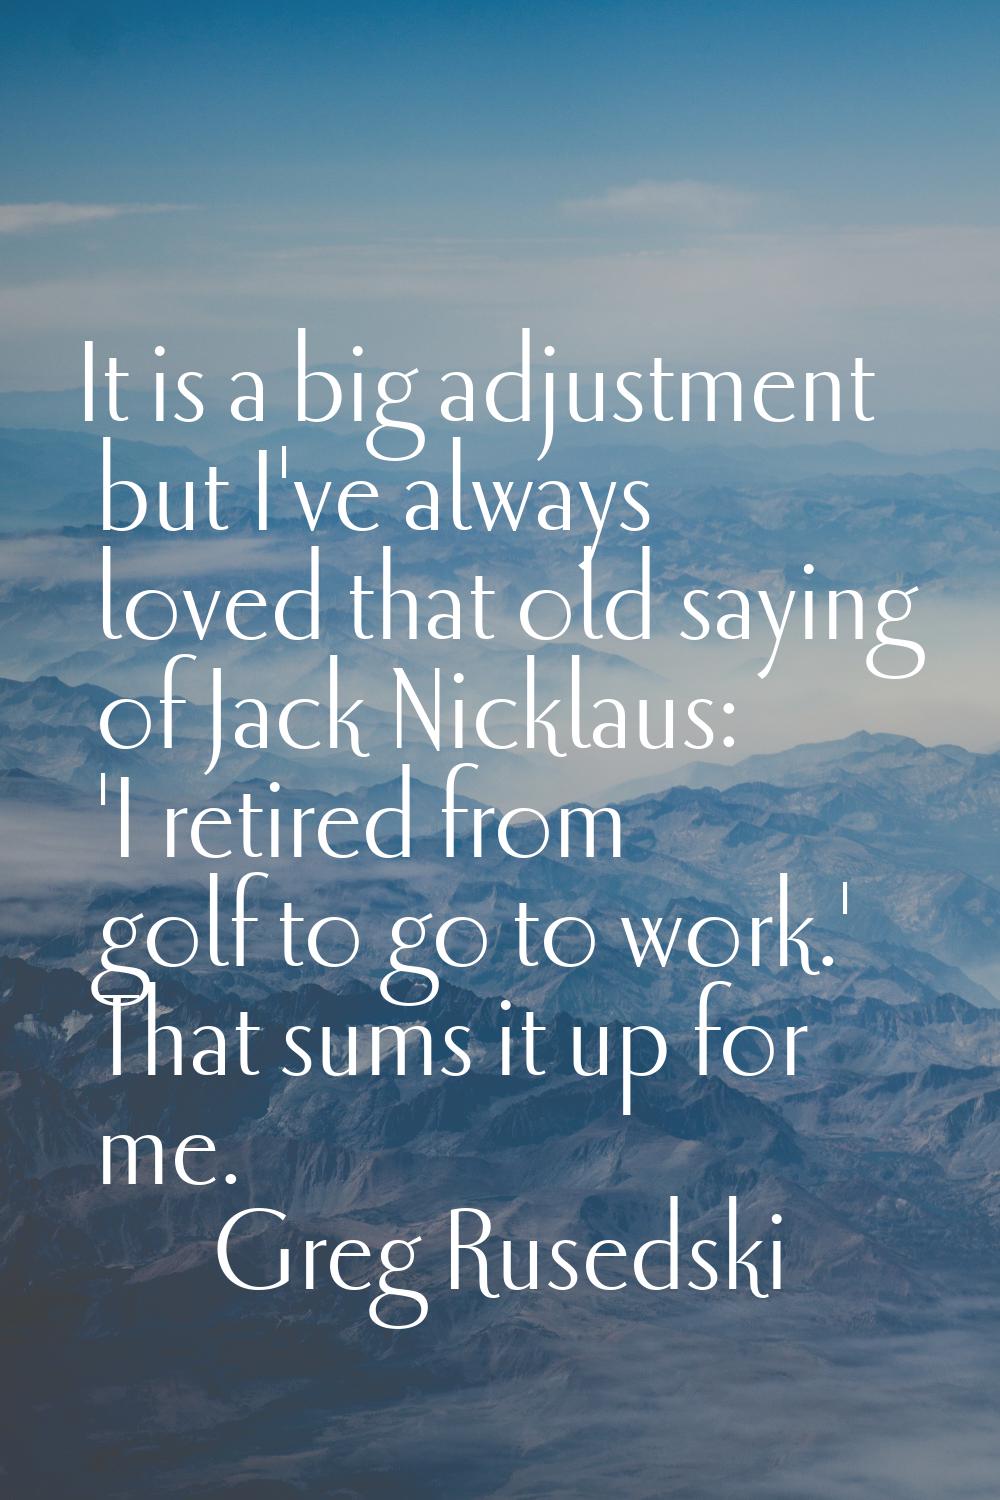 It is a big adjustment but I've always loved that old saying of Jack Nicklaus: 'I retired from golf